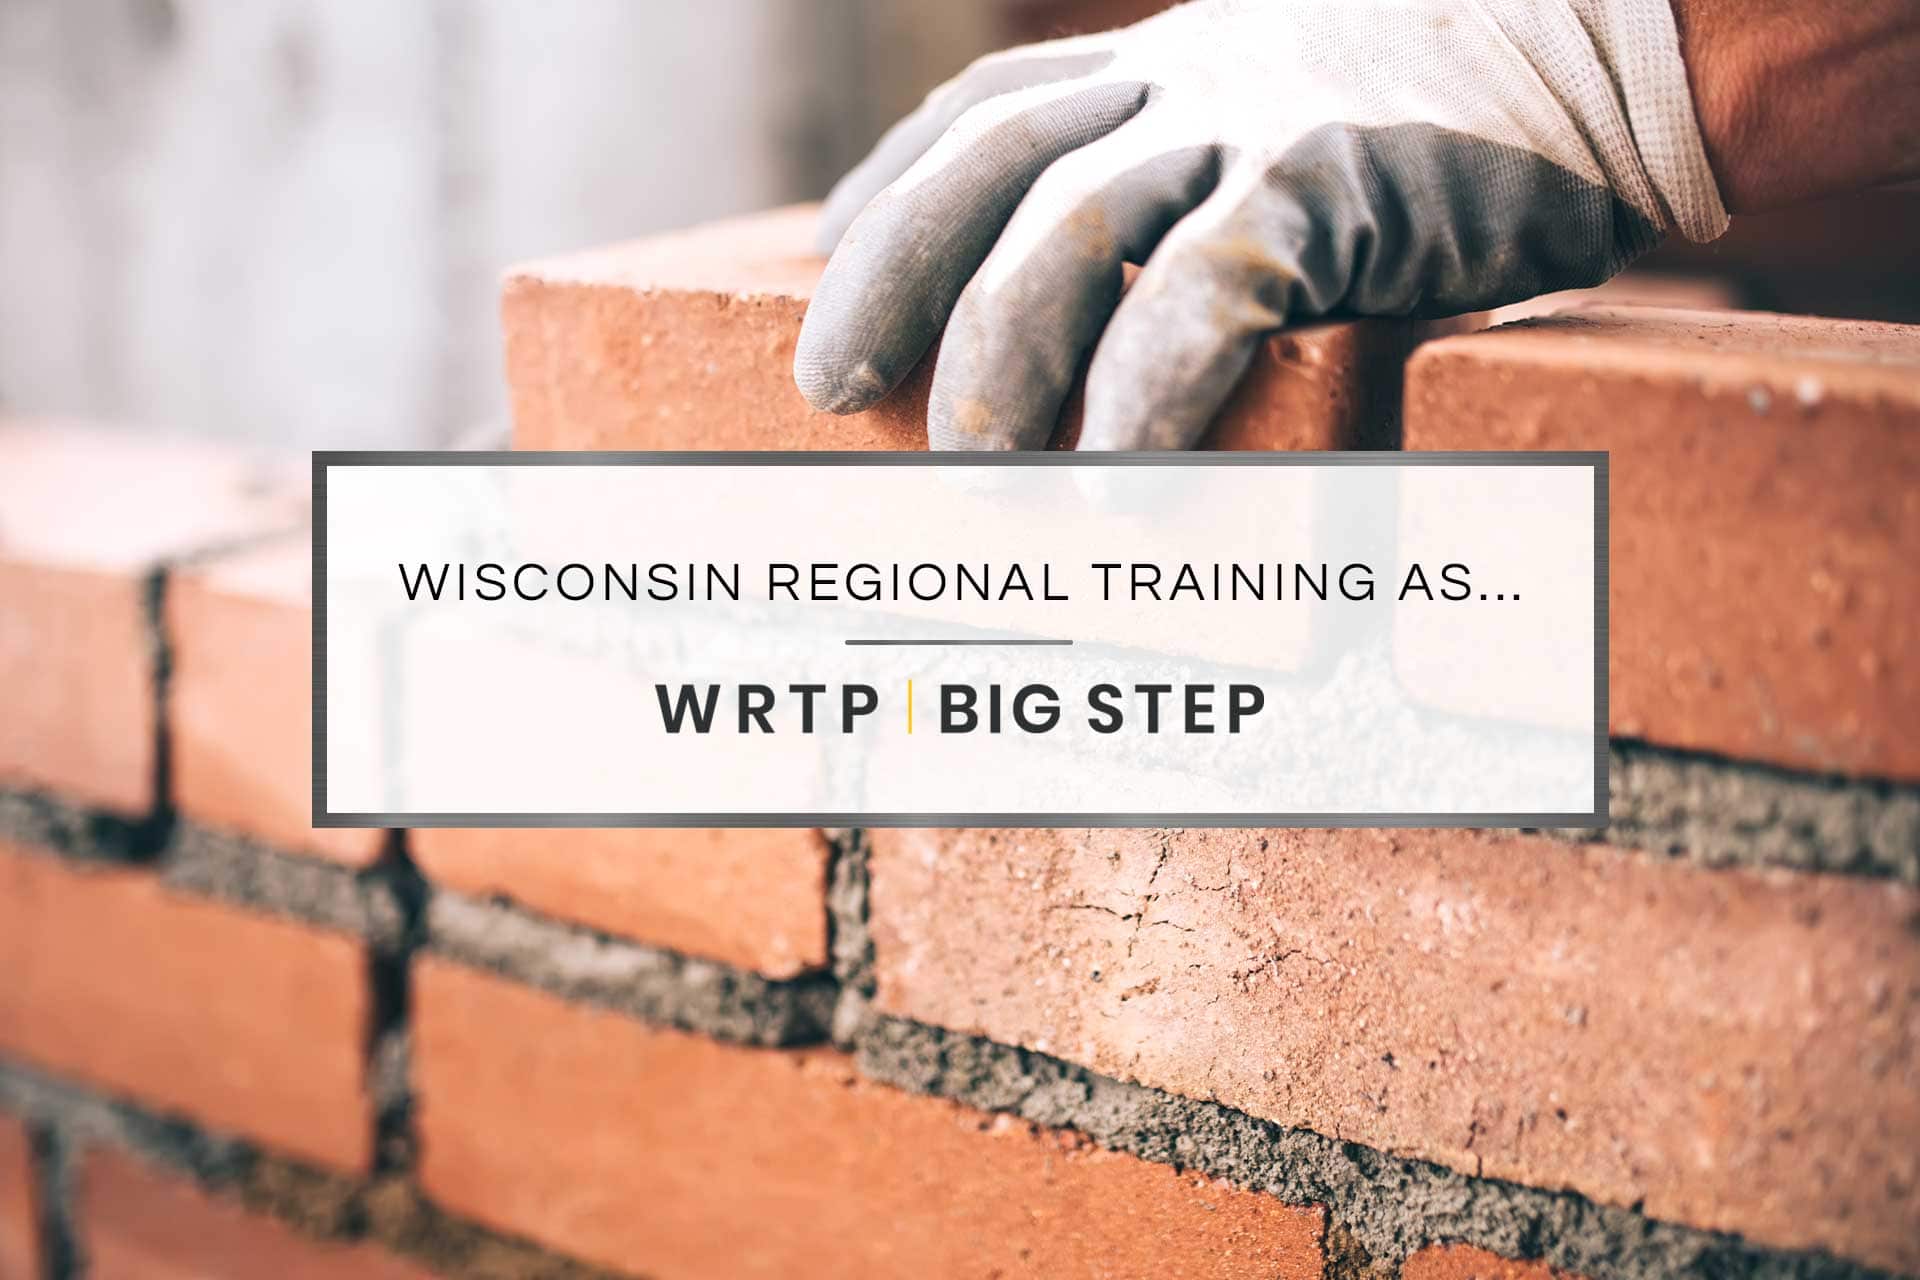 Wisconsin Regional Training Partnership looks to offer trades as career option for youth | WRTP | BIG STEP